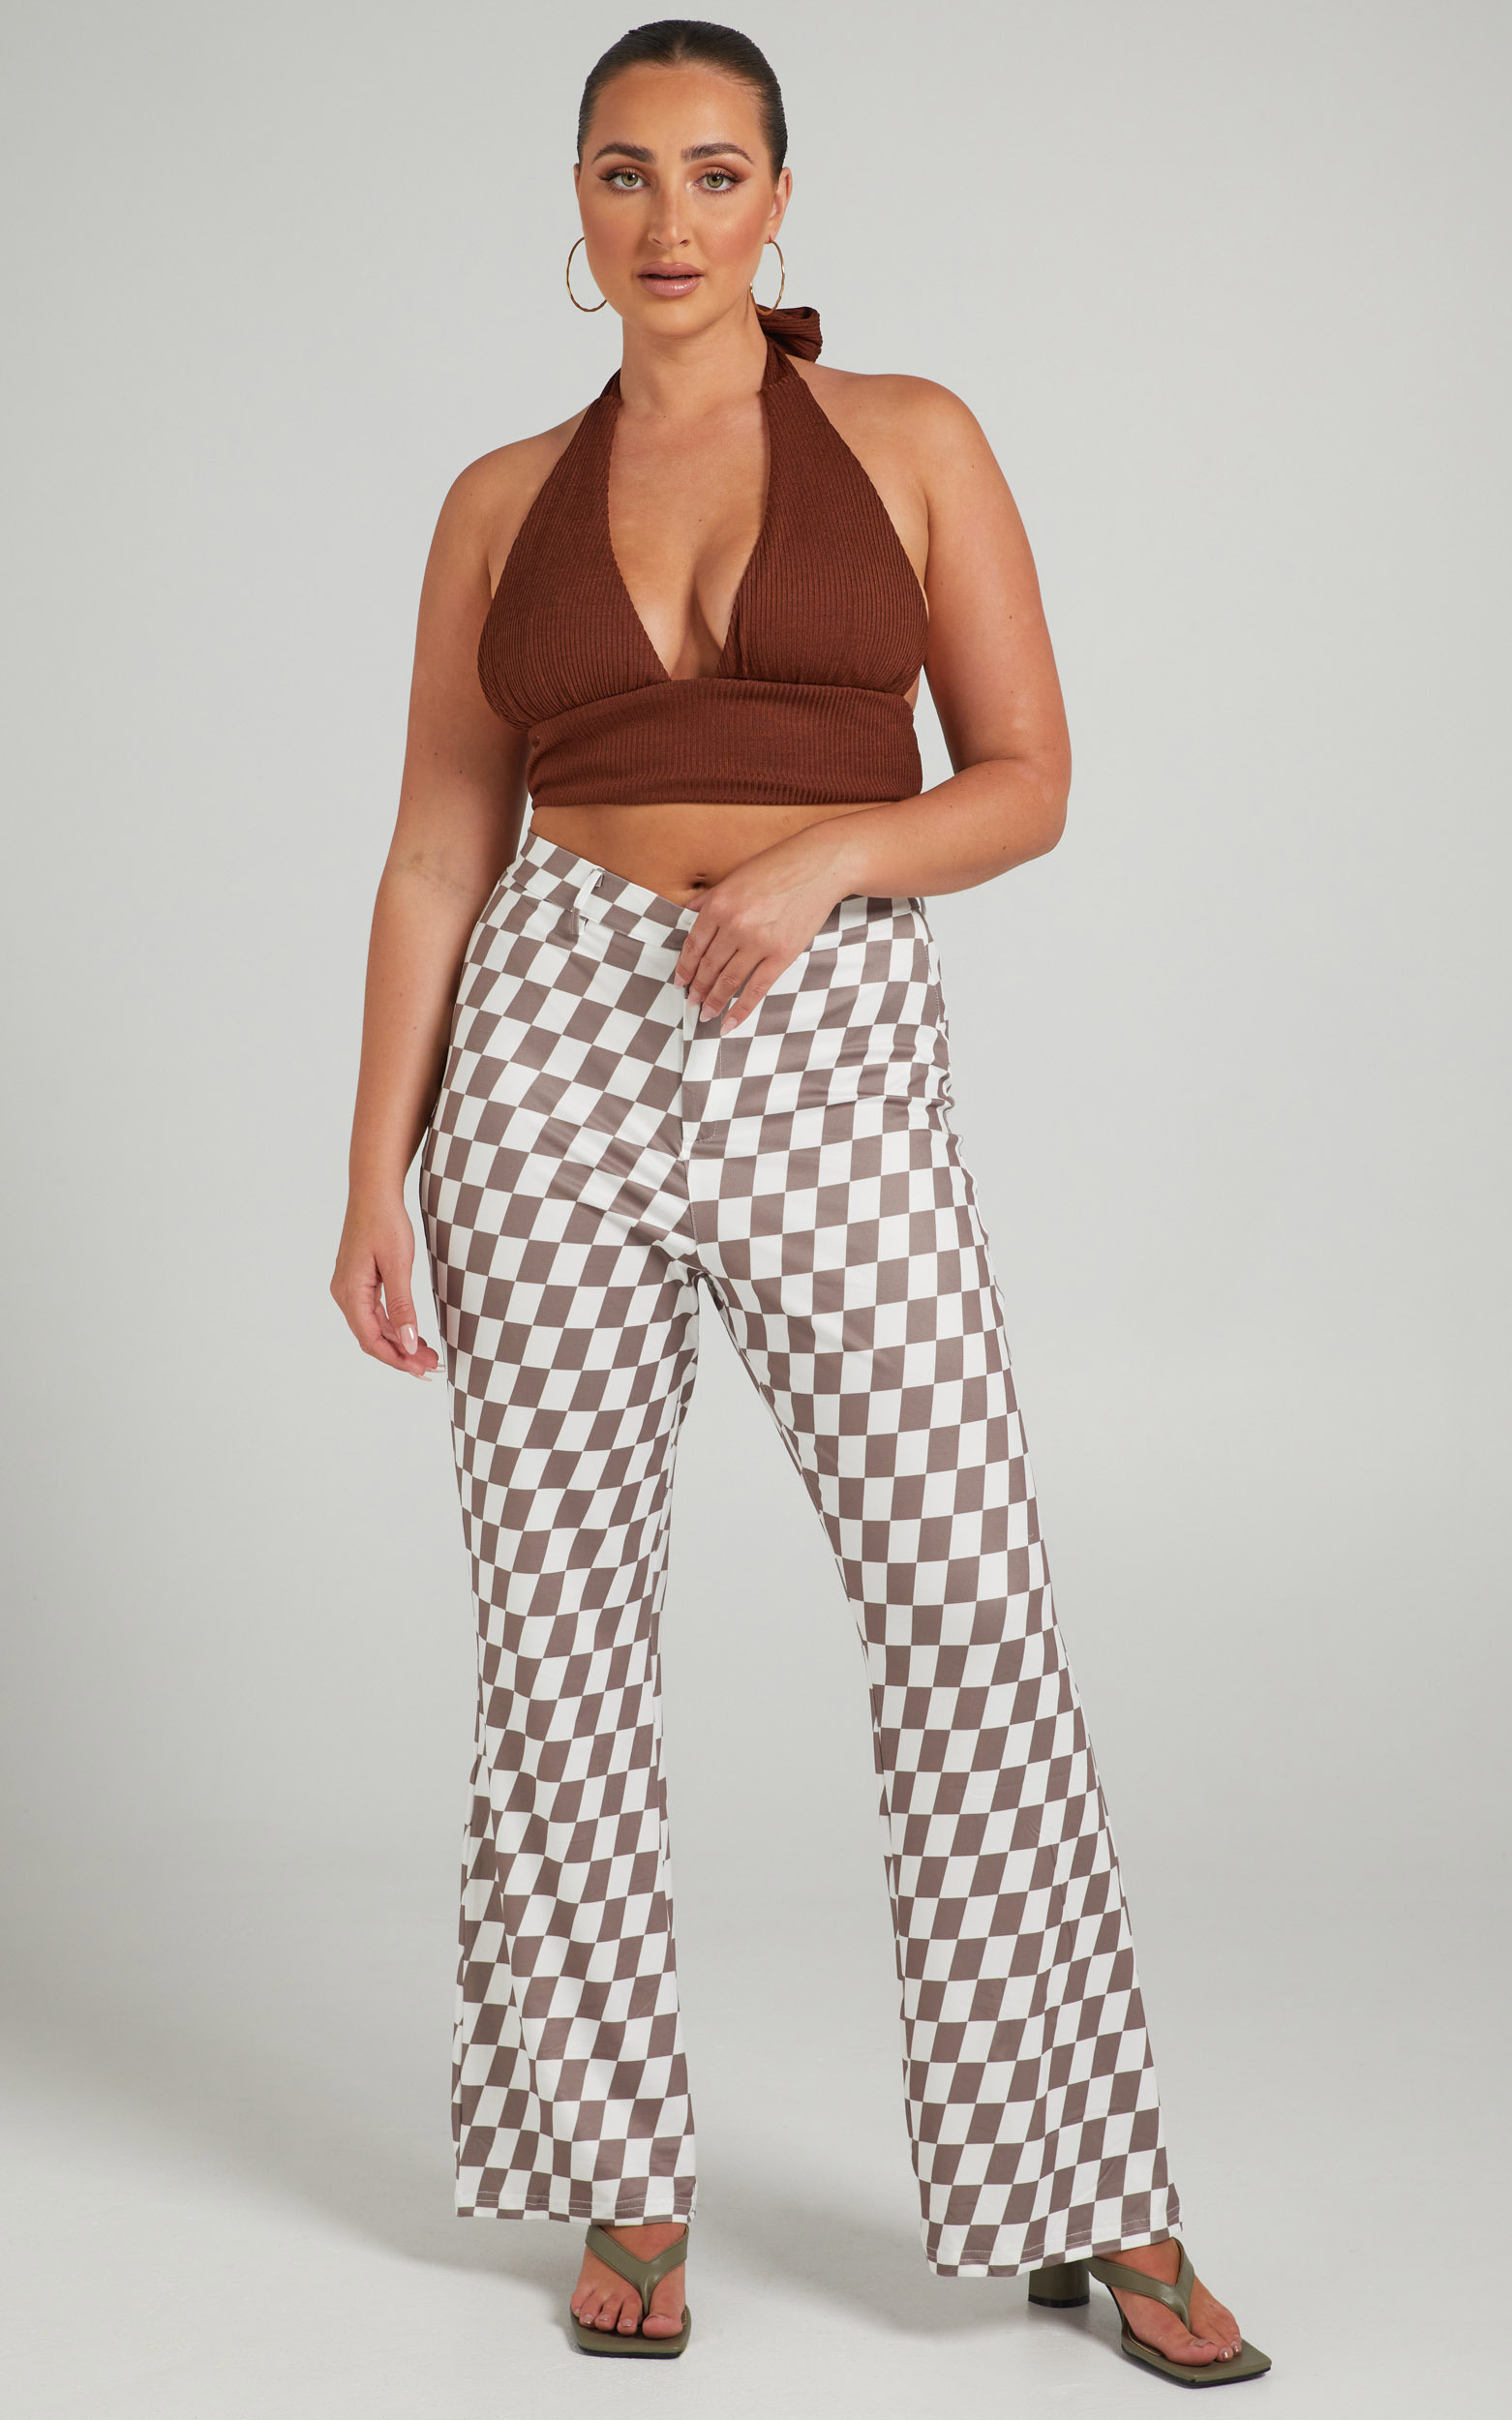 Lenny Mid Rise Pants in Brown check - 06, BRN1, hi-res image number null